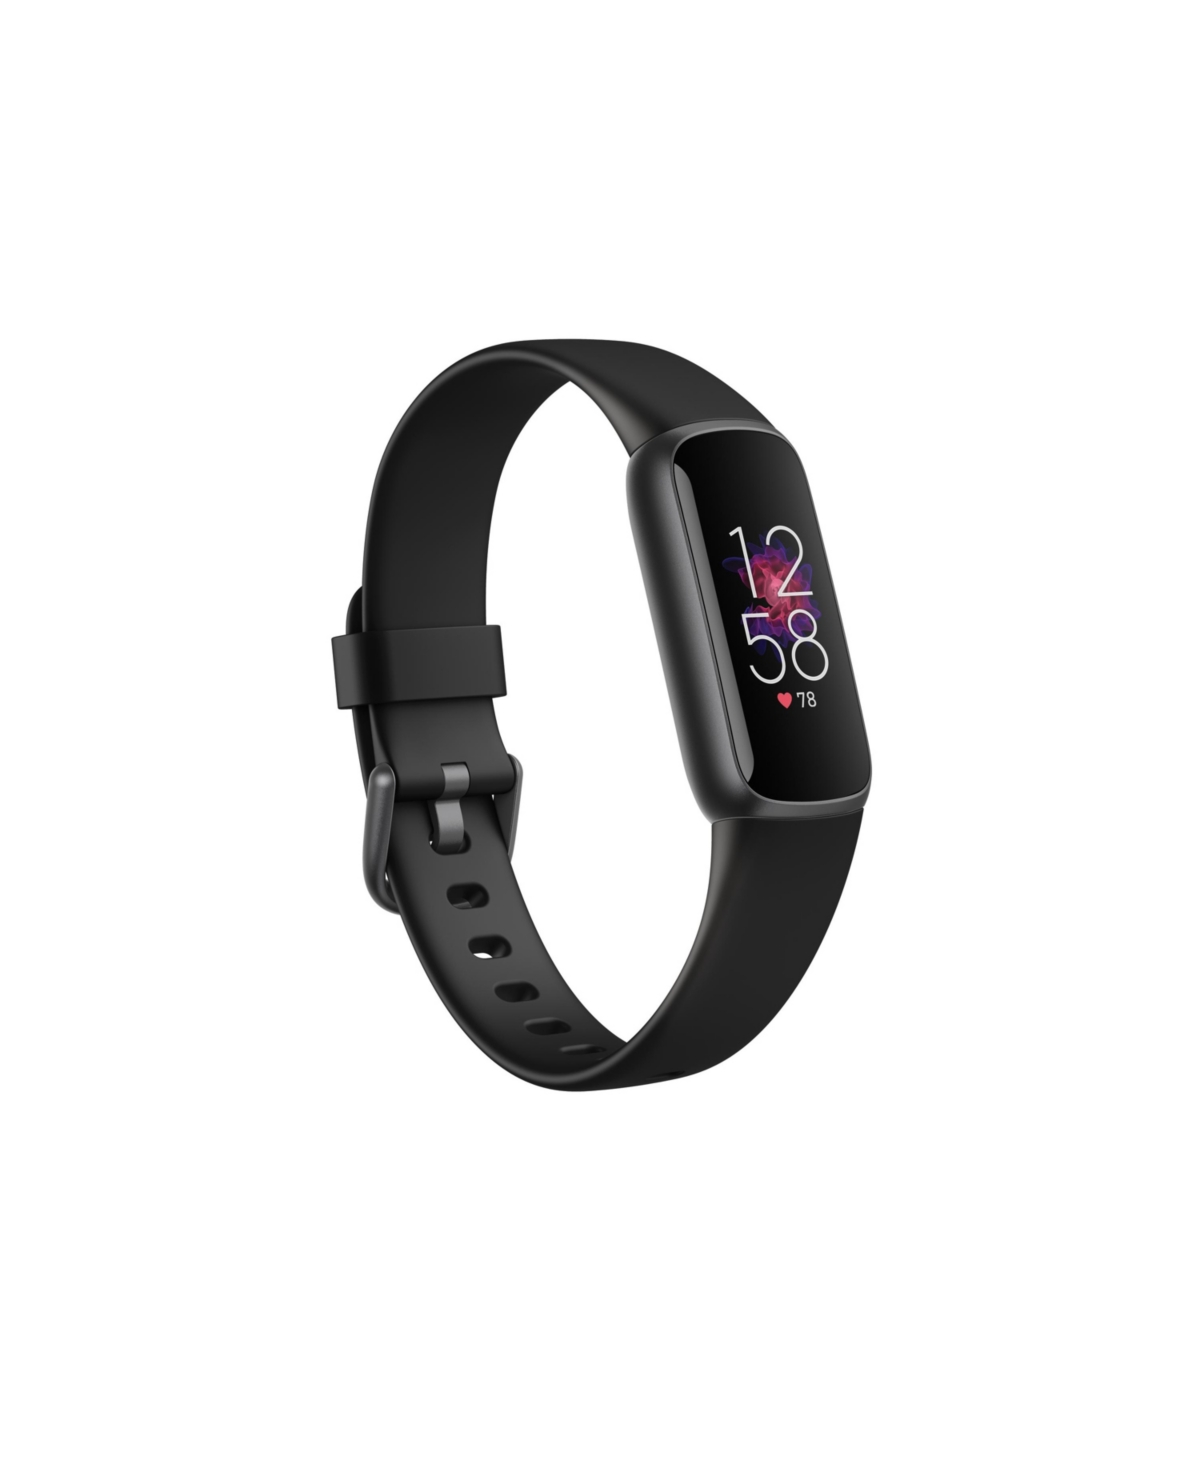 Fitbit Luxe Fitness Tracker in Core Black with Graphite Black Wrist Band